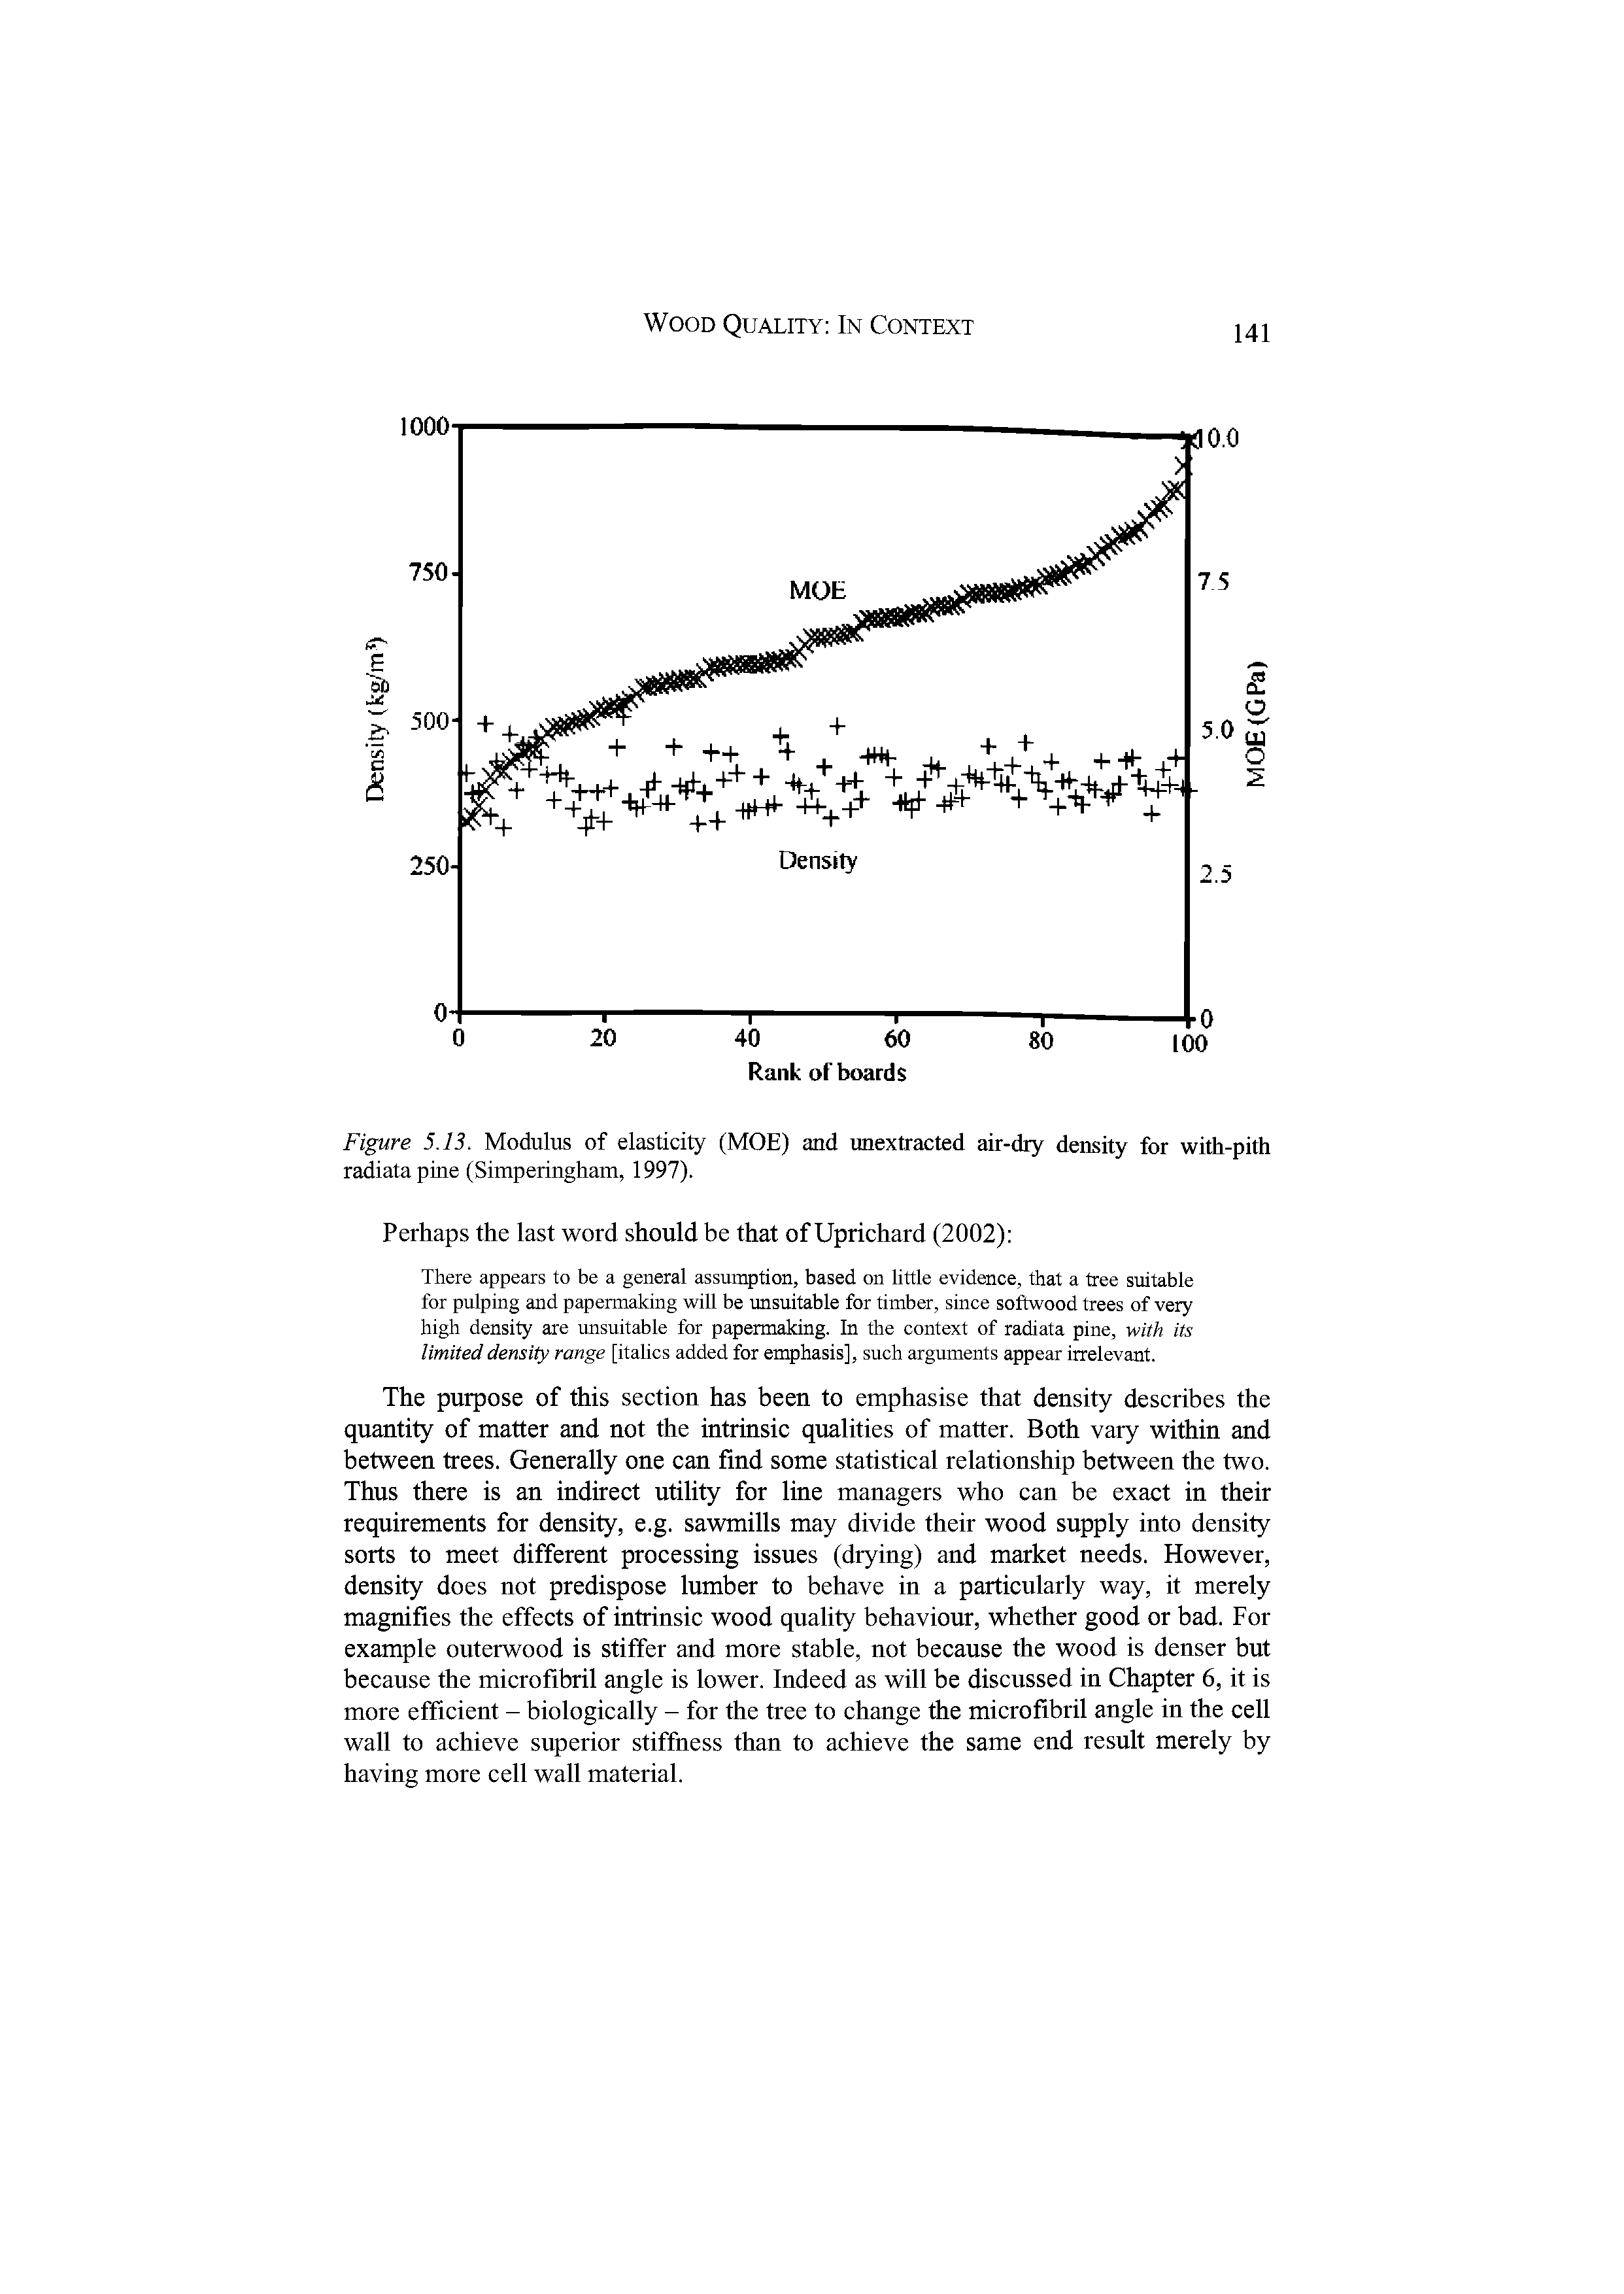 Figure 5.13. Modulus of elasticity (MOE) and unextracted air-dry density for with-pith radiatapine (Simperingham, 1997).